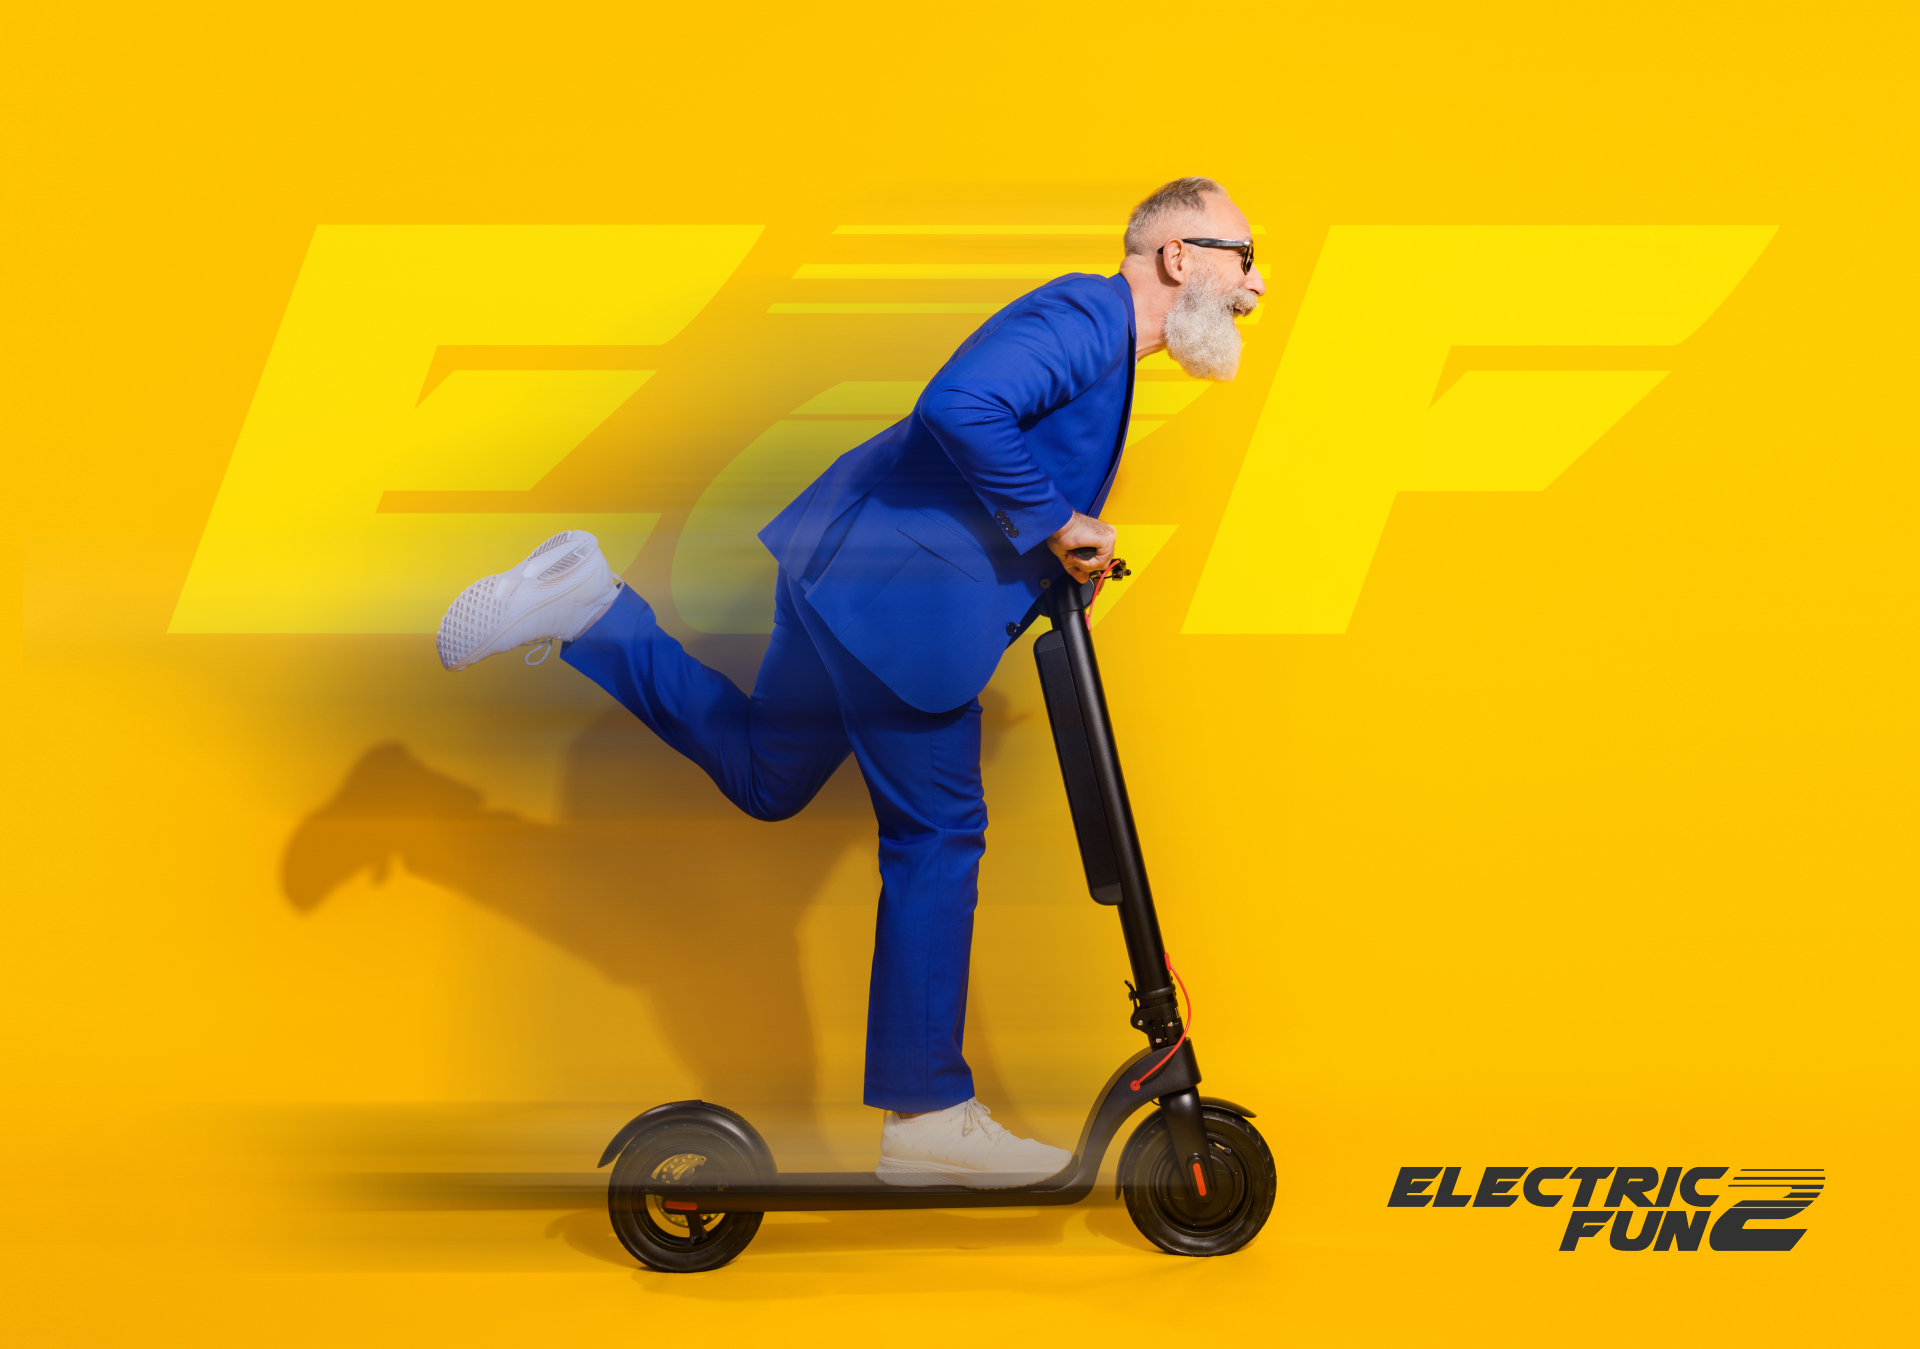 A Glimpse at the 5 Fastest Electric Scooter this 2022